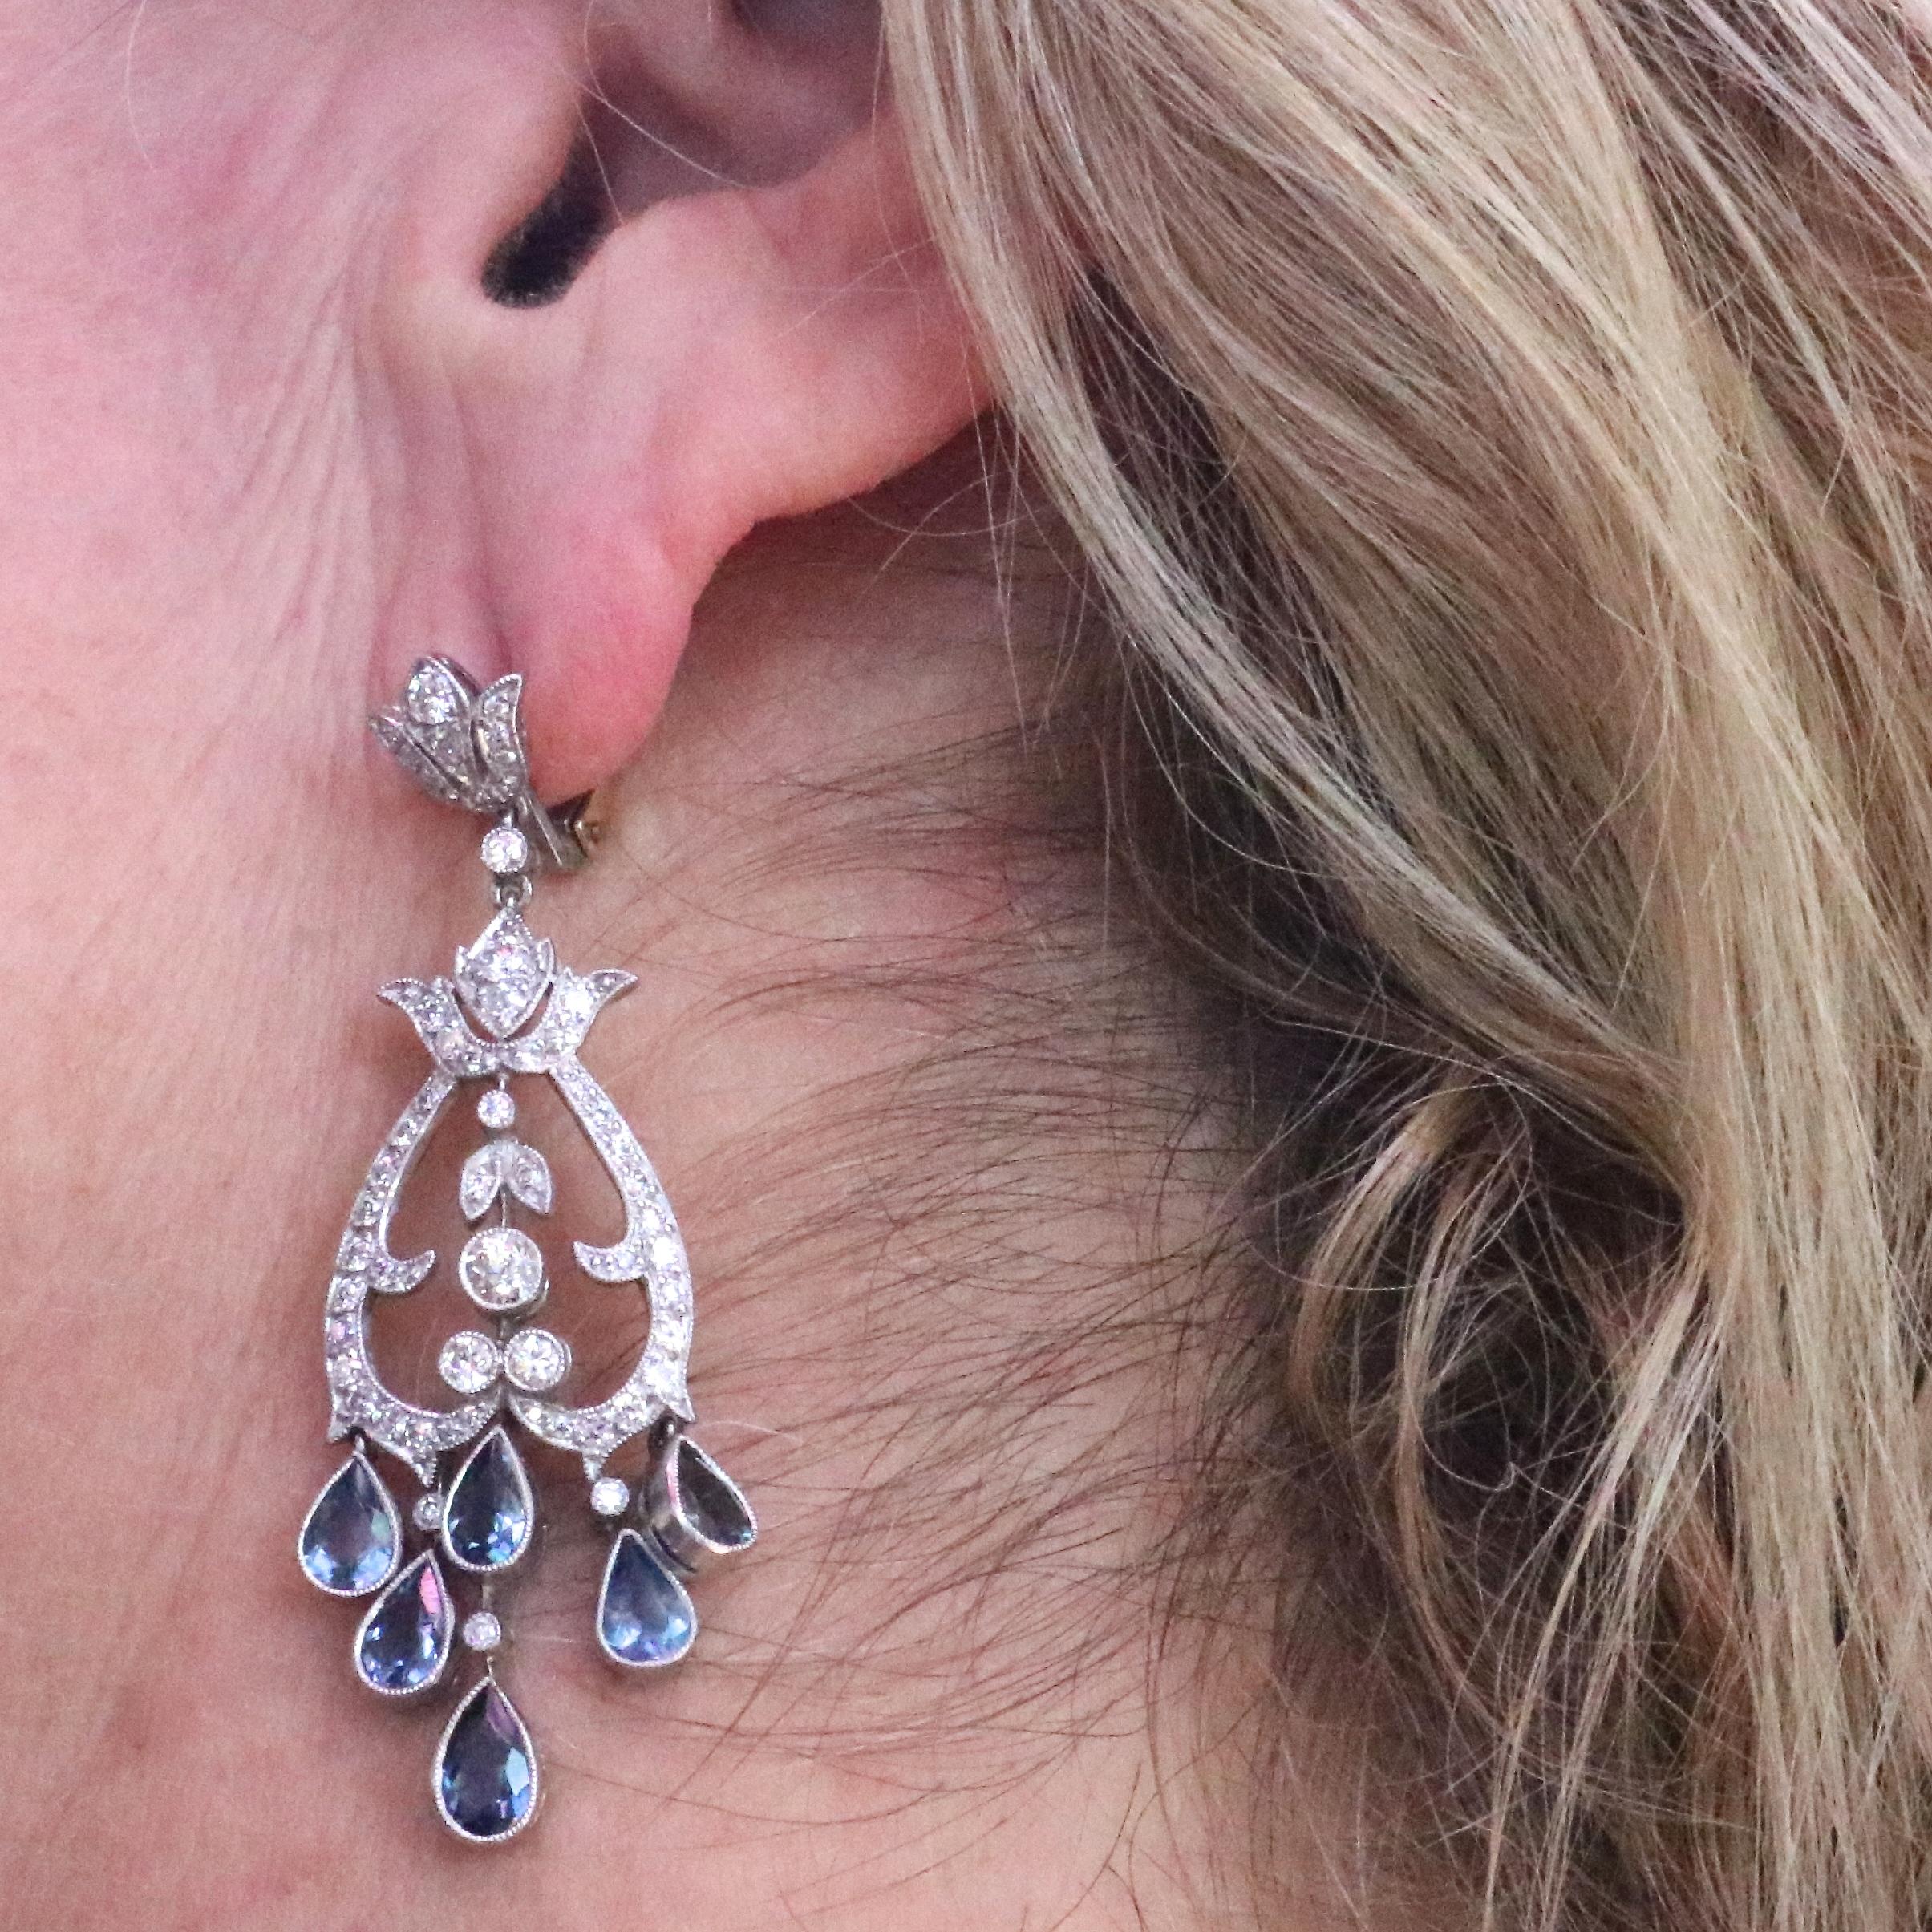 Art deco inspired aquamarine diamond platinum chandelier earrings. Featuring 12 faceted teardrop shape aquamarines that weigh approximately 4.20 carats. With 114 mostly old European cut diamonds, with a few single cut diamonds all weighing